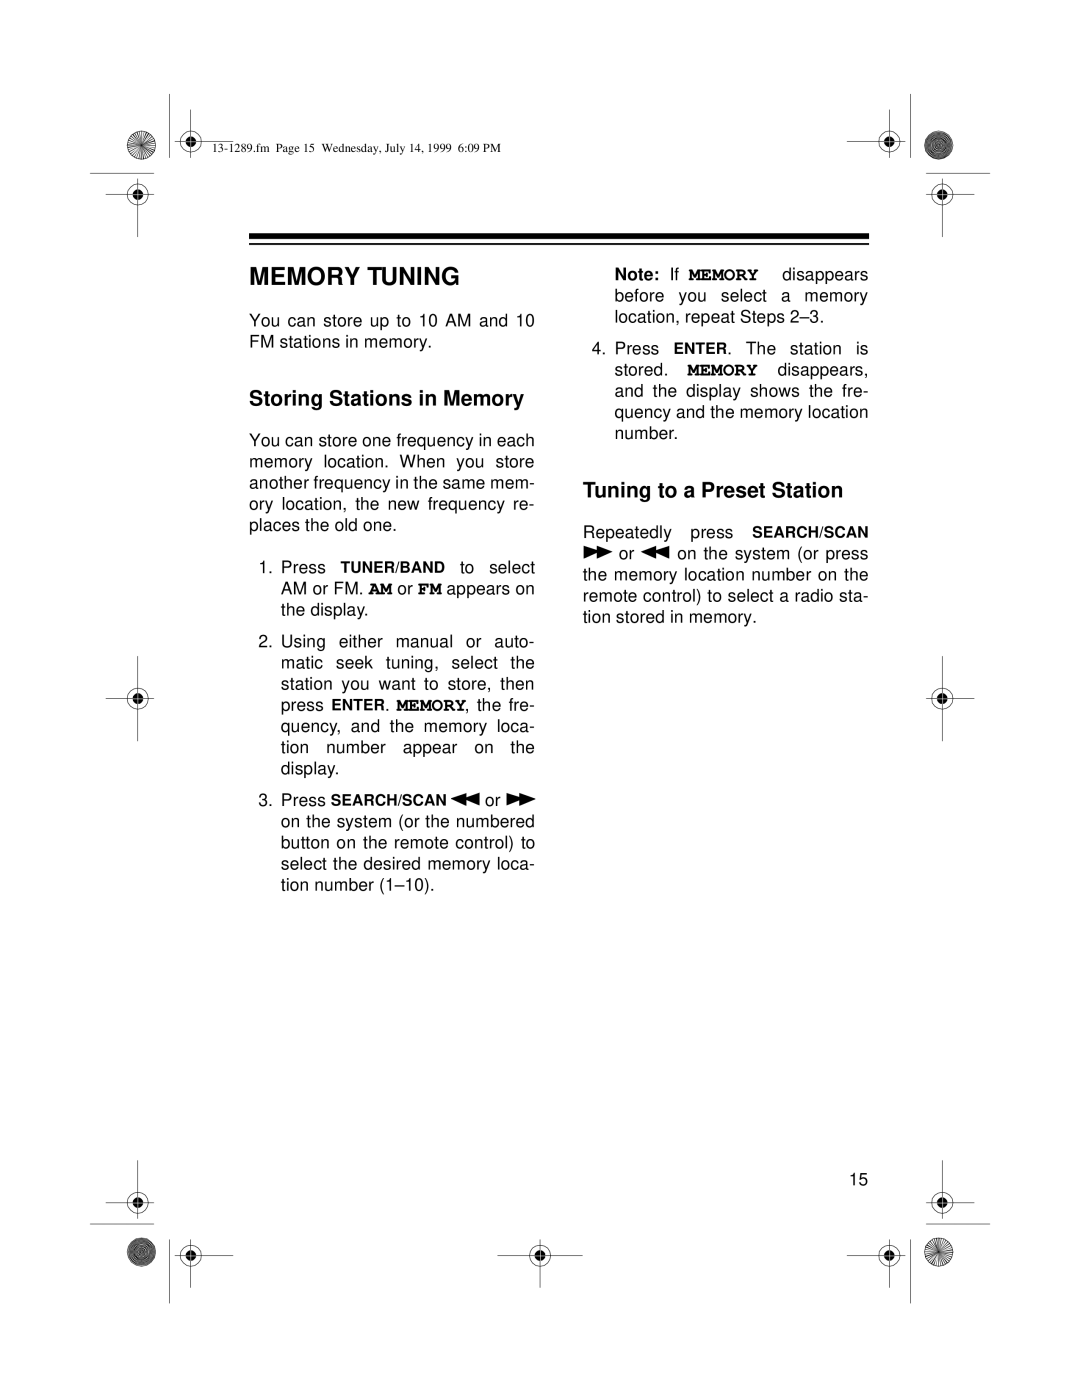 Optimus 742 owner manual Memory Tuning, Storing Stations in Memory, Tuning to a Preset Station 